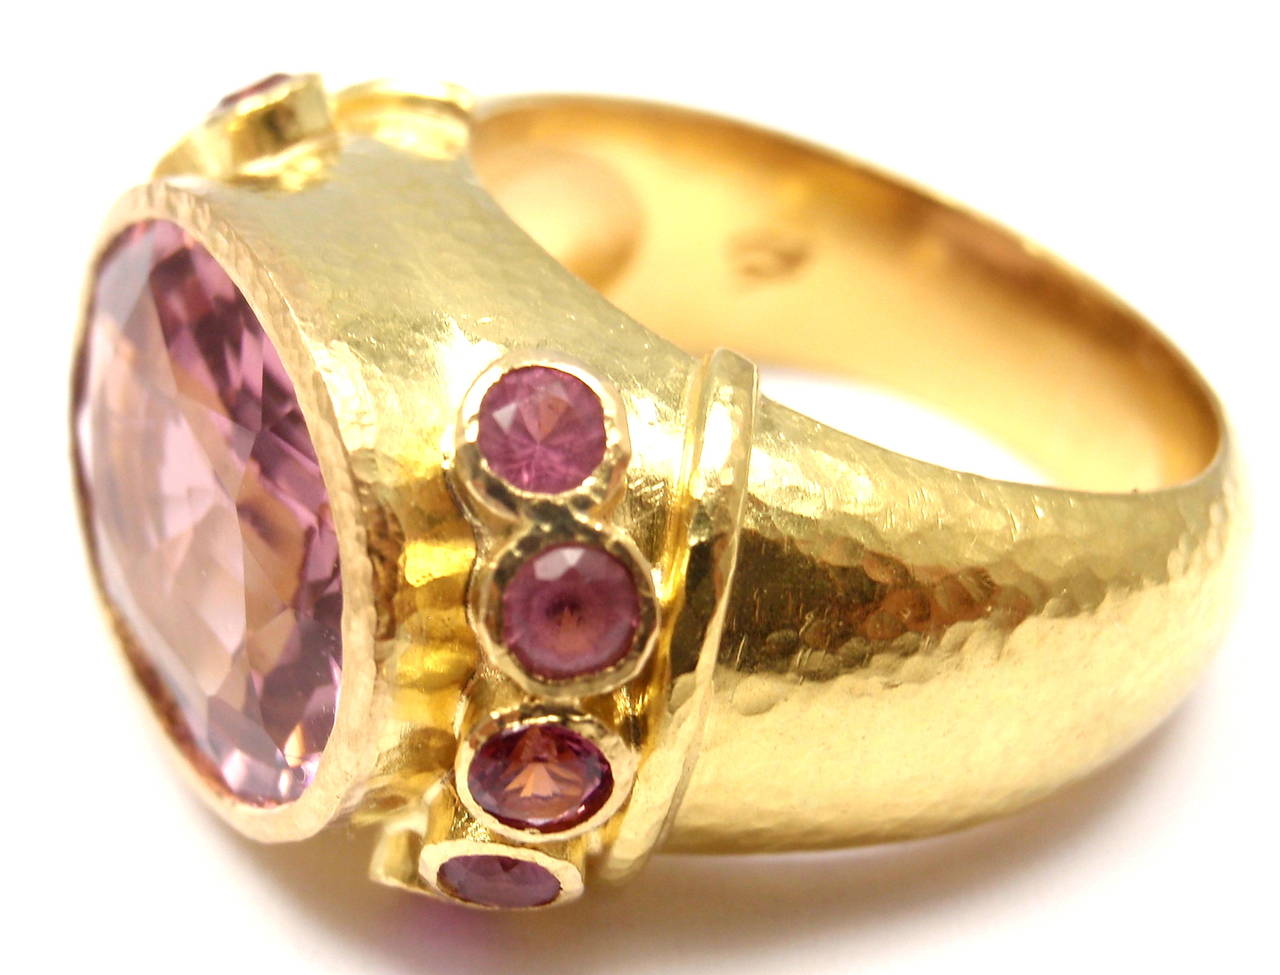 19k Yellow Gold Kunzite & Pink Sapphire Ring by Elizabeth Locke.
With 1 Kunzite 12mm x 14mm
10 round pink sapphires 3mm each

Details: 
Ring Size: 6.5
Weight: 15.3 grams
Width: 13mm
Stamped Hallmarks: Elizabeth Lock Hallmark 19k
*Free